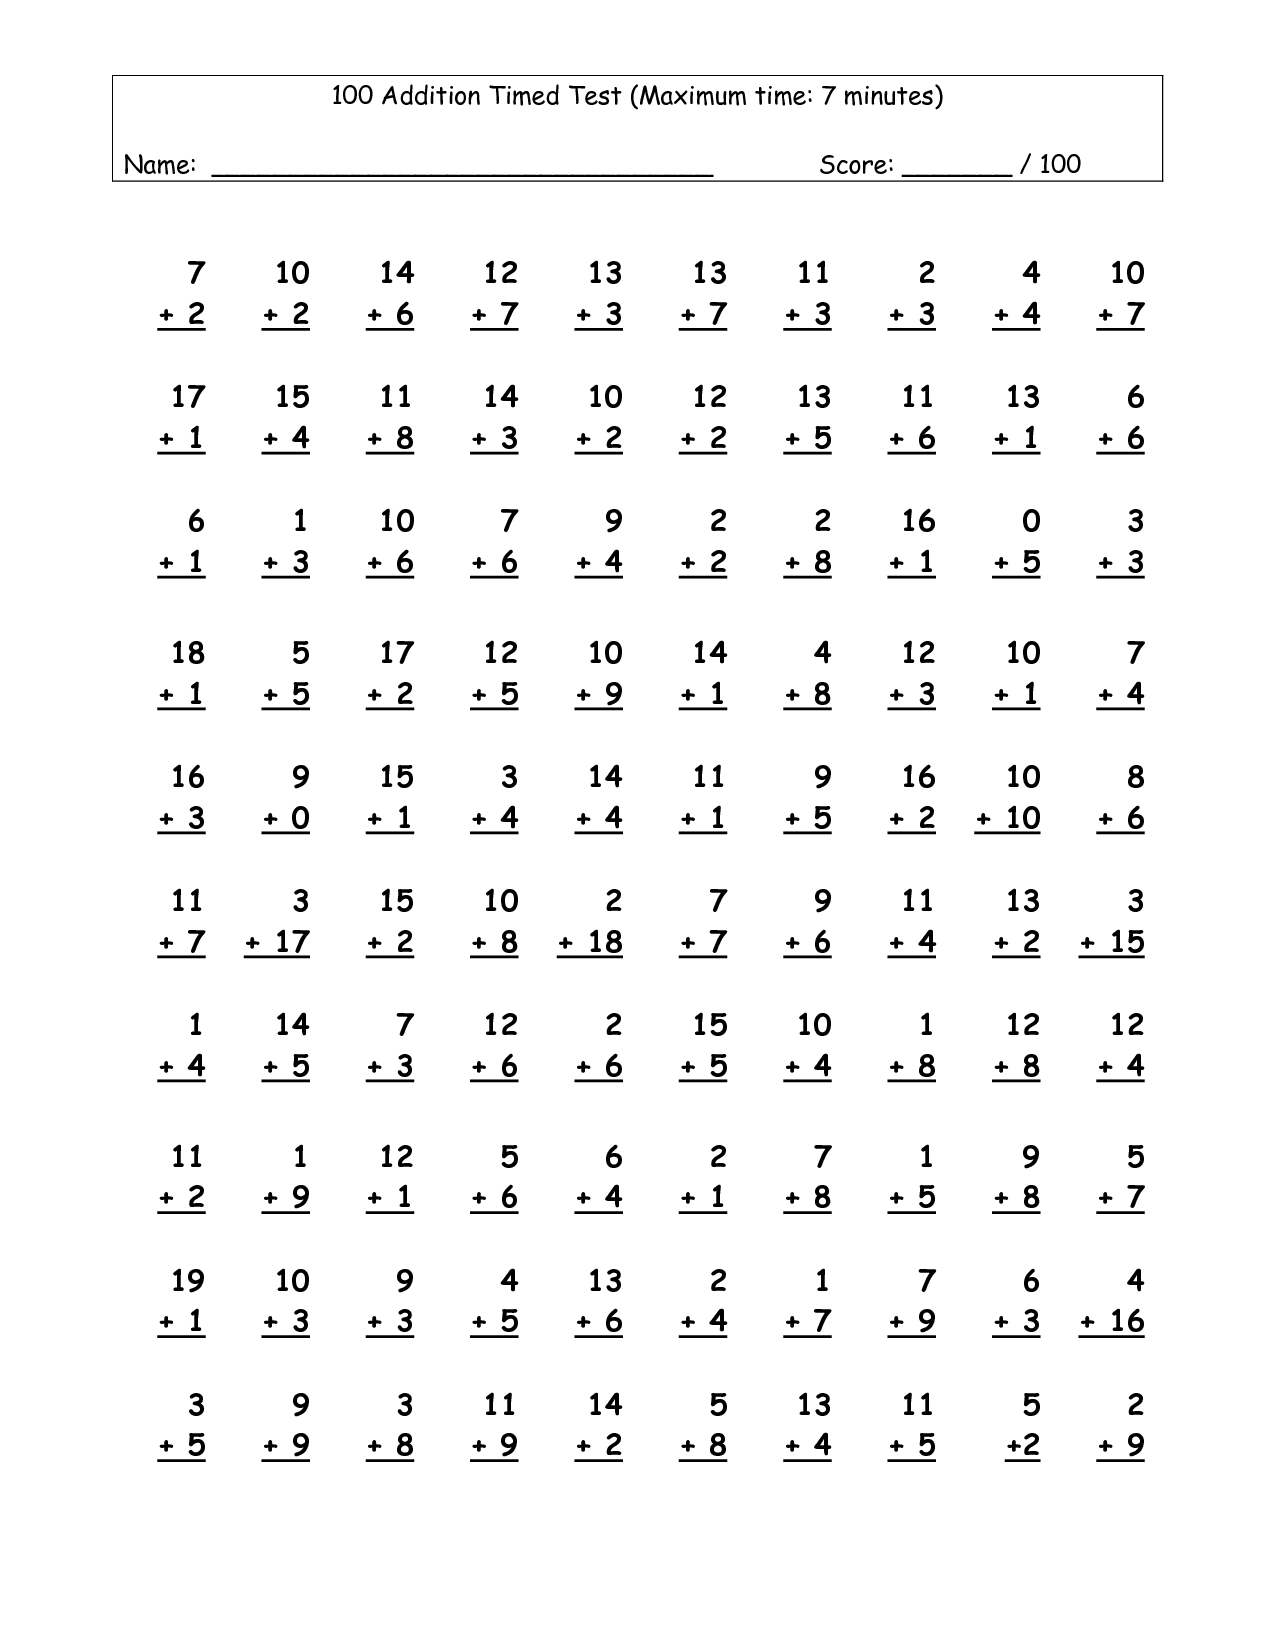 16-best-images-of-math-drill-worksheets-printable-math-addition-drill